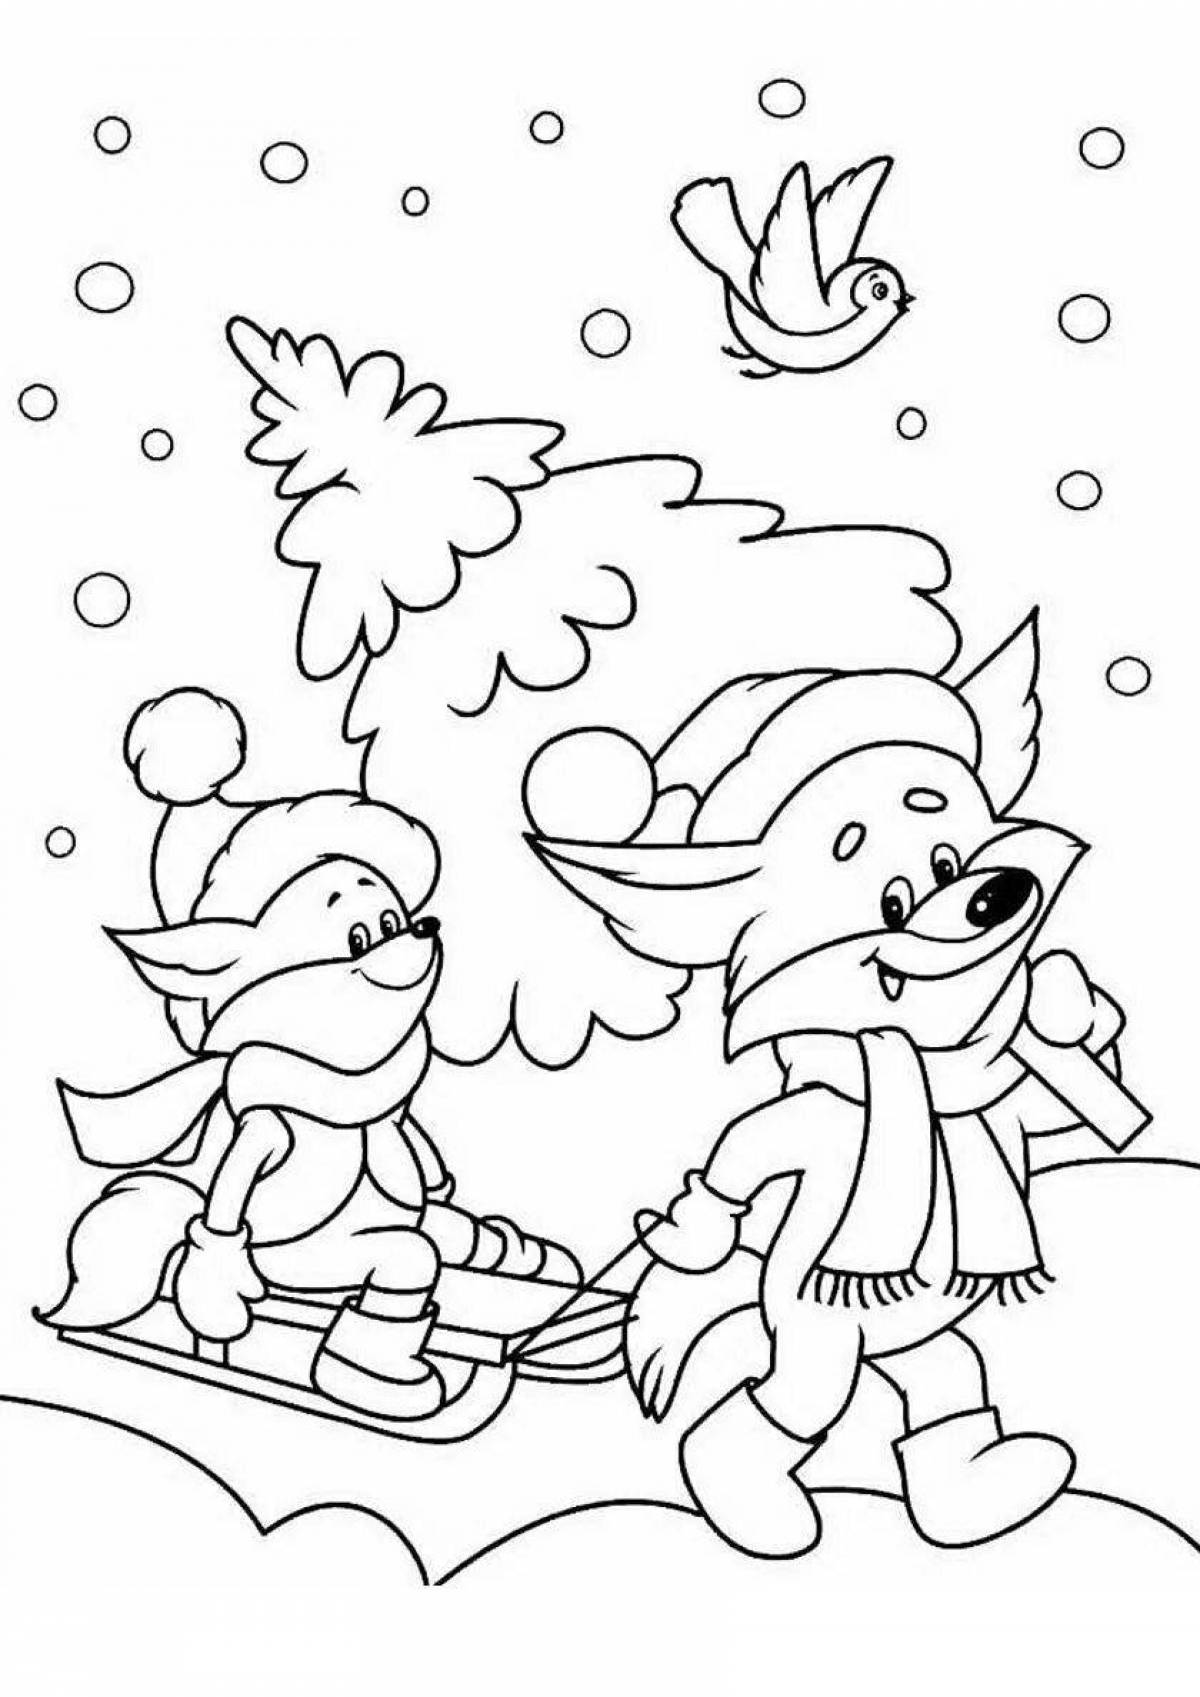 Delightful coloring drawing of a winter fairy tale